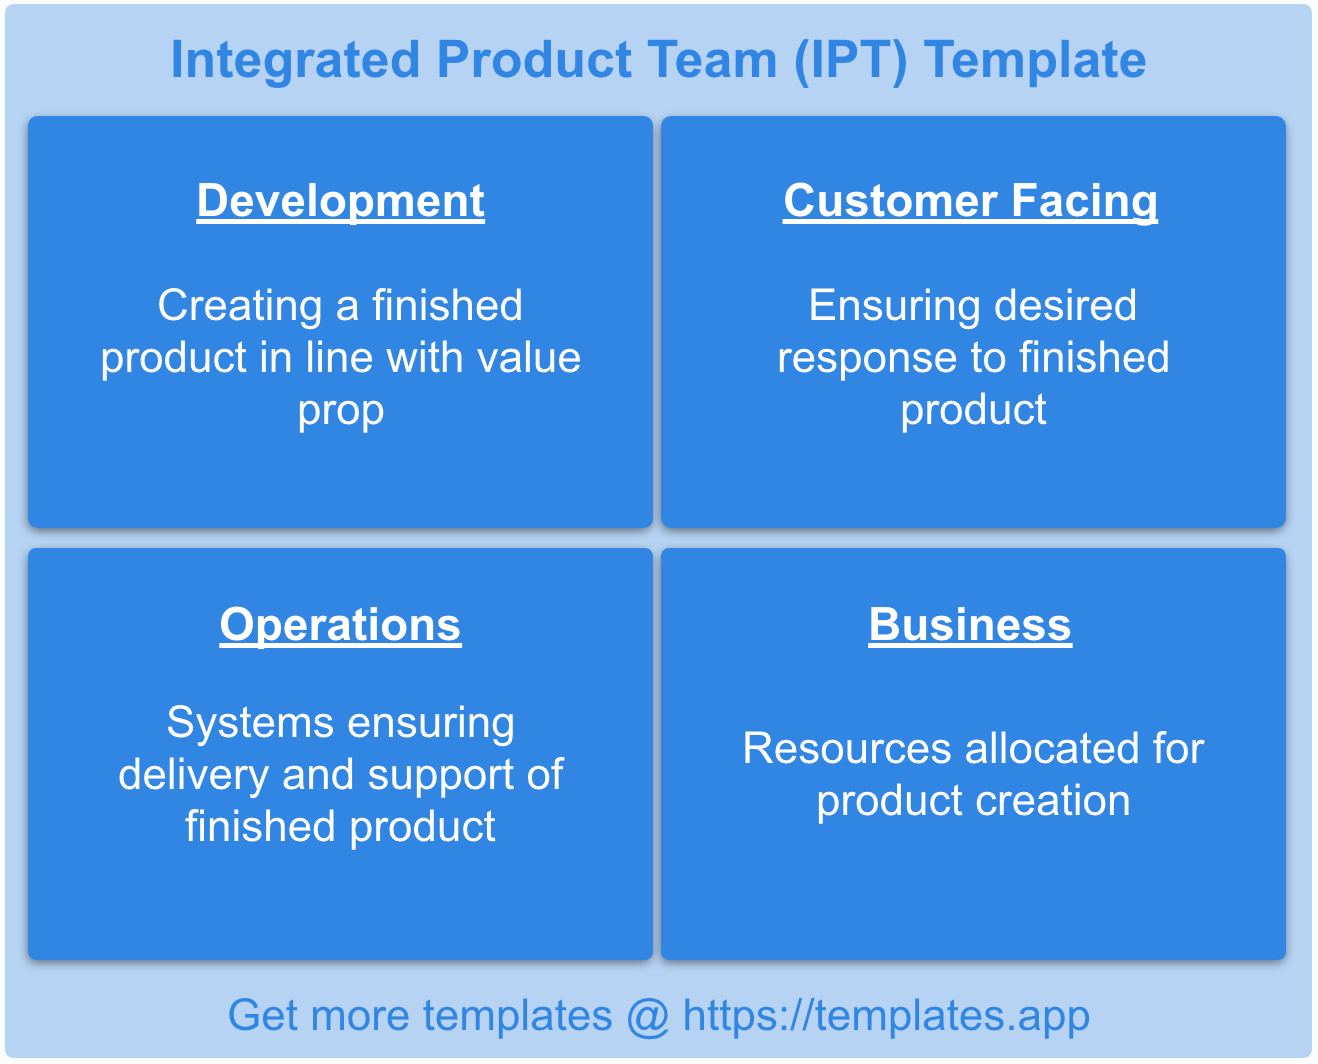 Integrated Product Team Template by templates.app